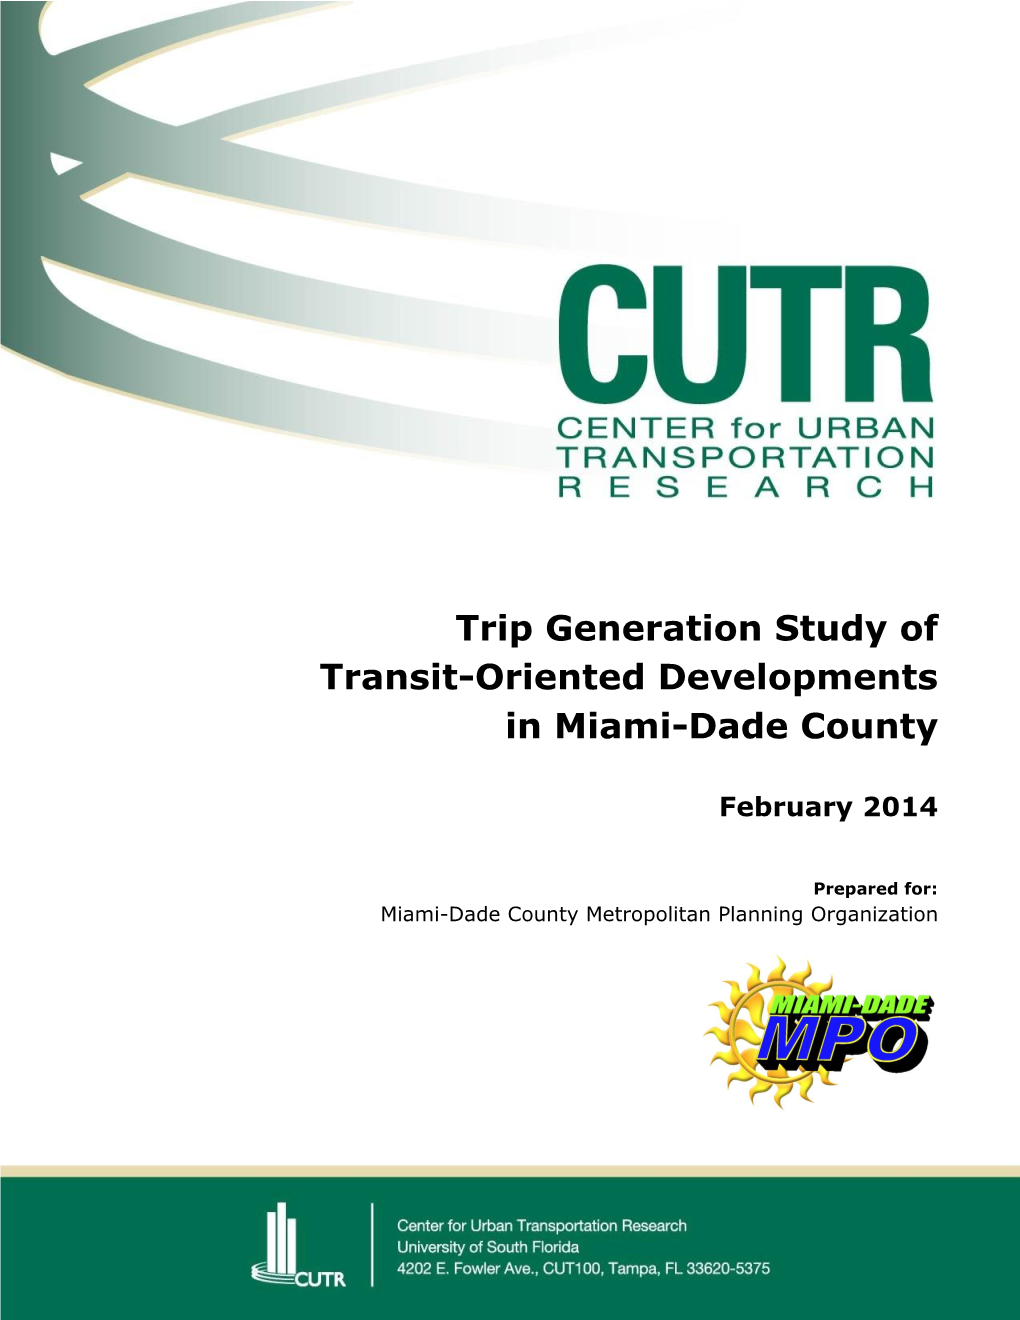 Trip Generation Study of Transit-Oriented Developments in Miami-Dade County